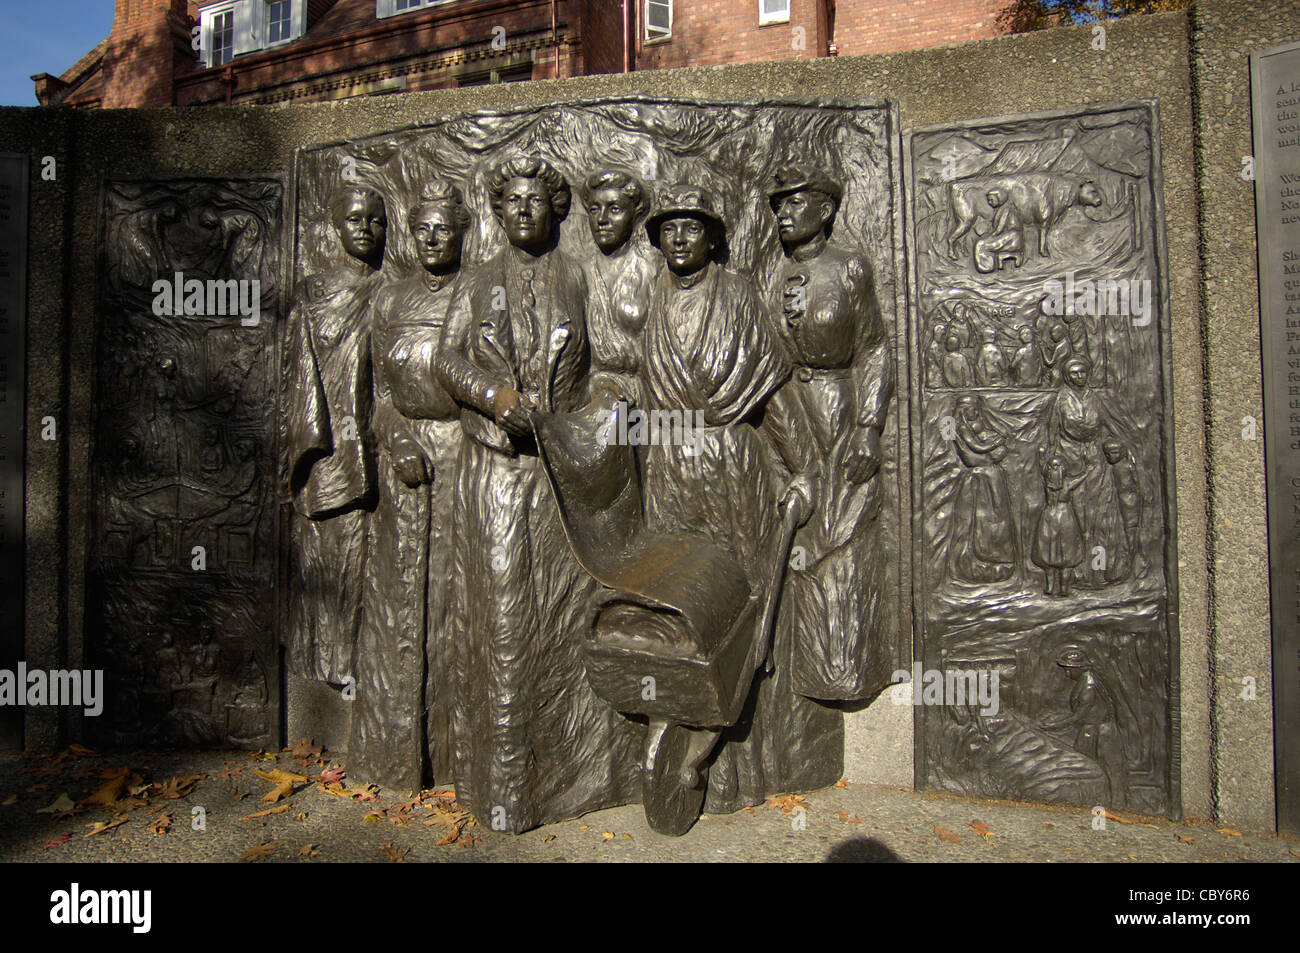 Christchurch monument commemorating women's emancipation march, New Zealand Stock Photo